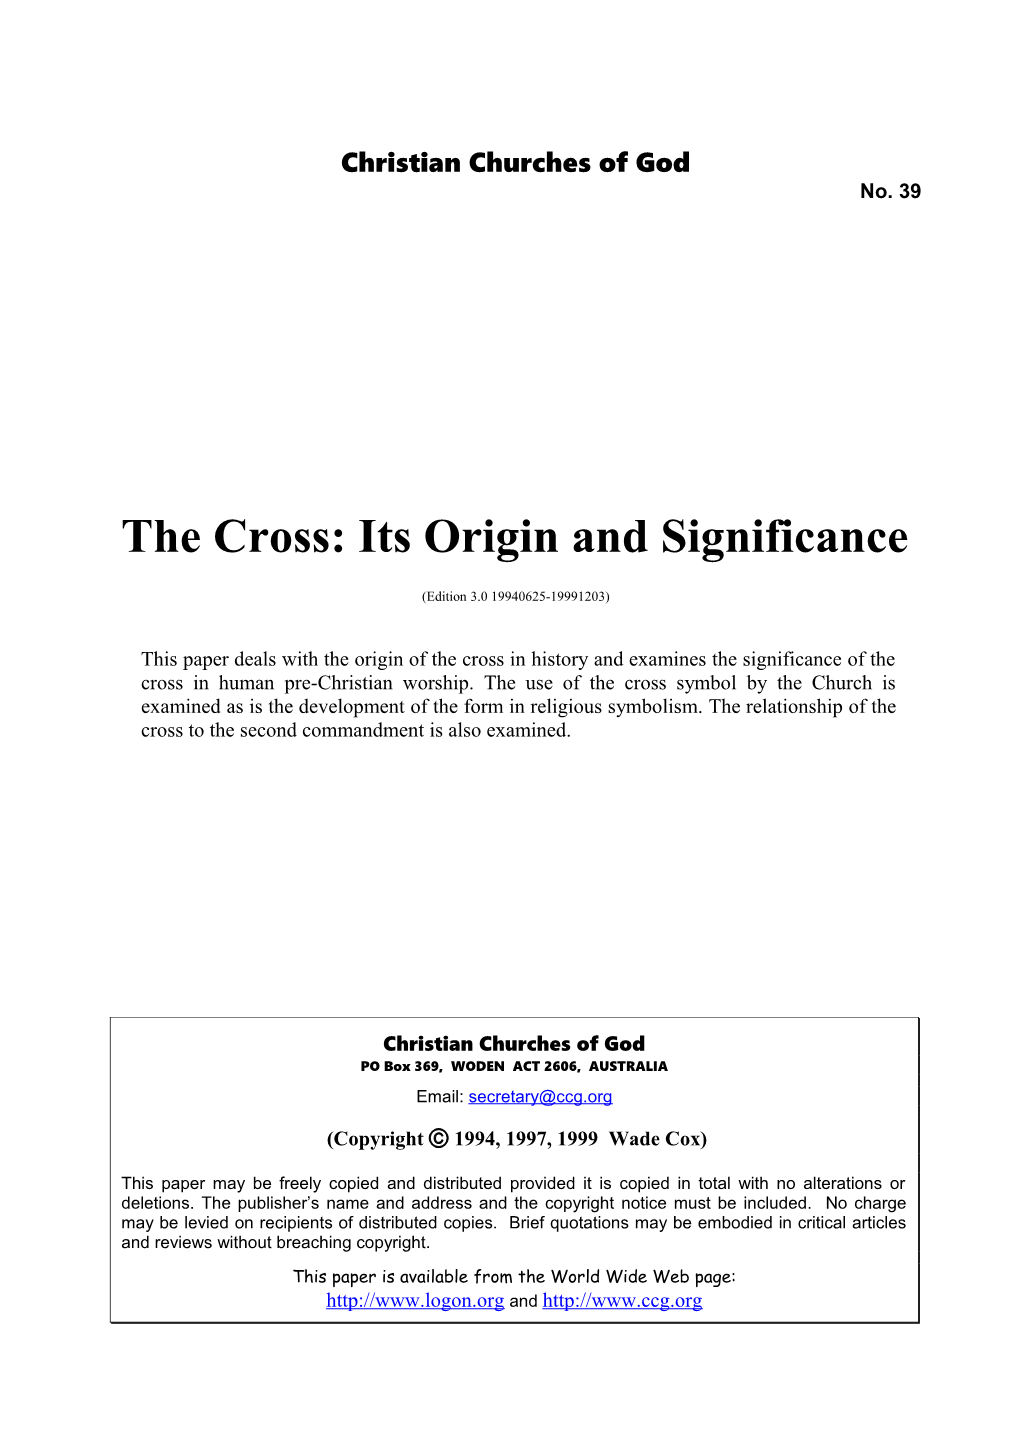 The Cross: Its Origin and Significance (No. 39)